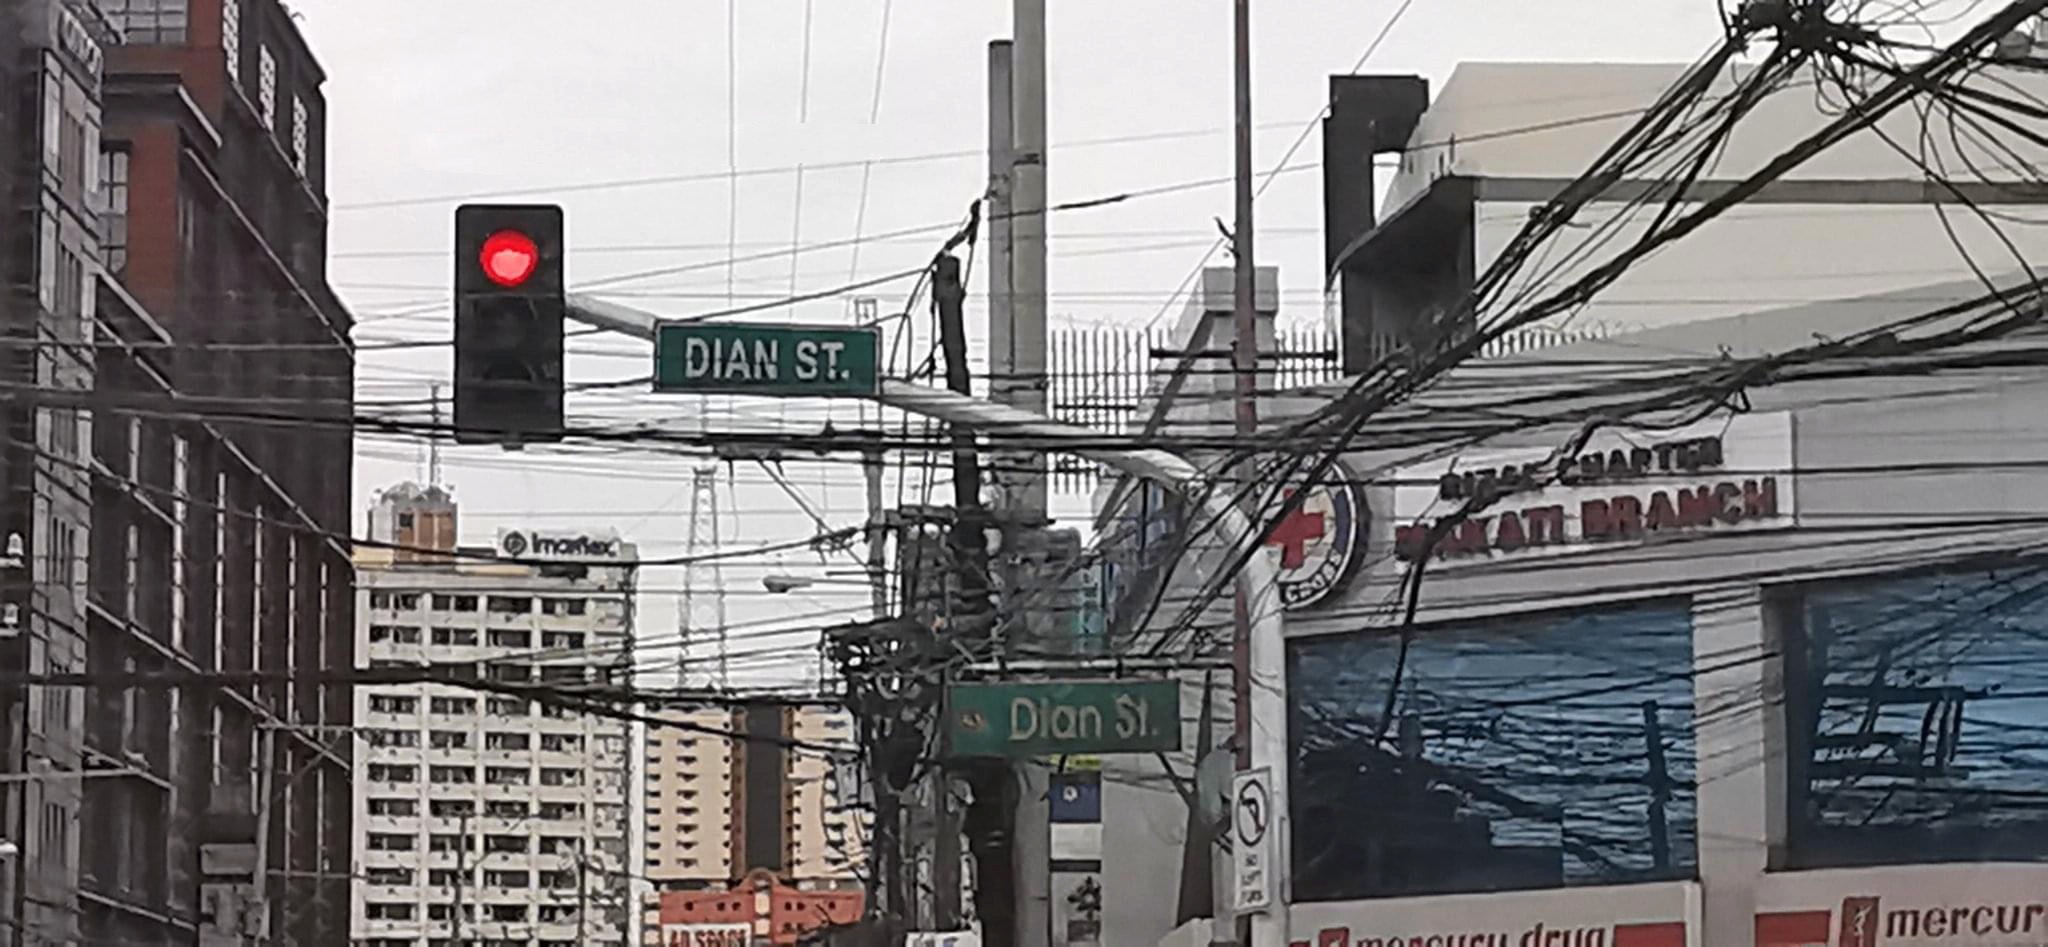 Dian Street, Manila – Commercial Lot for Sale‼️